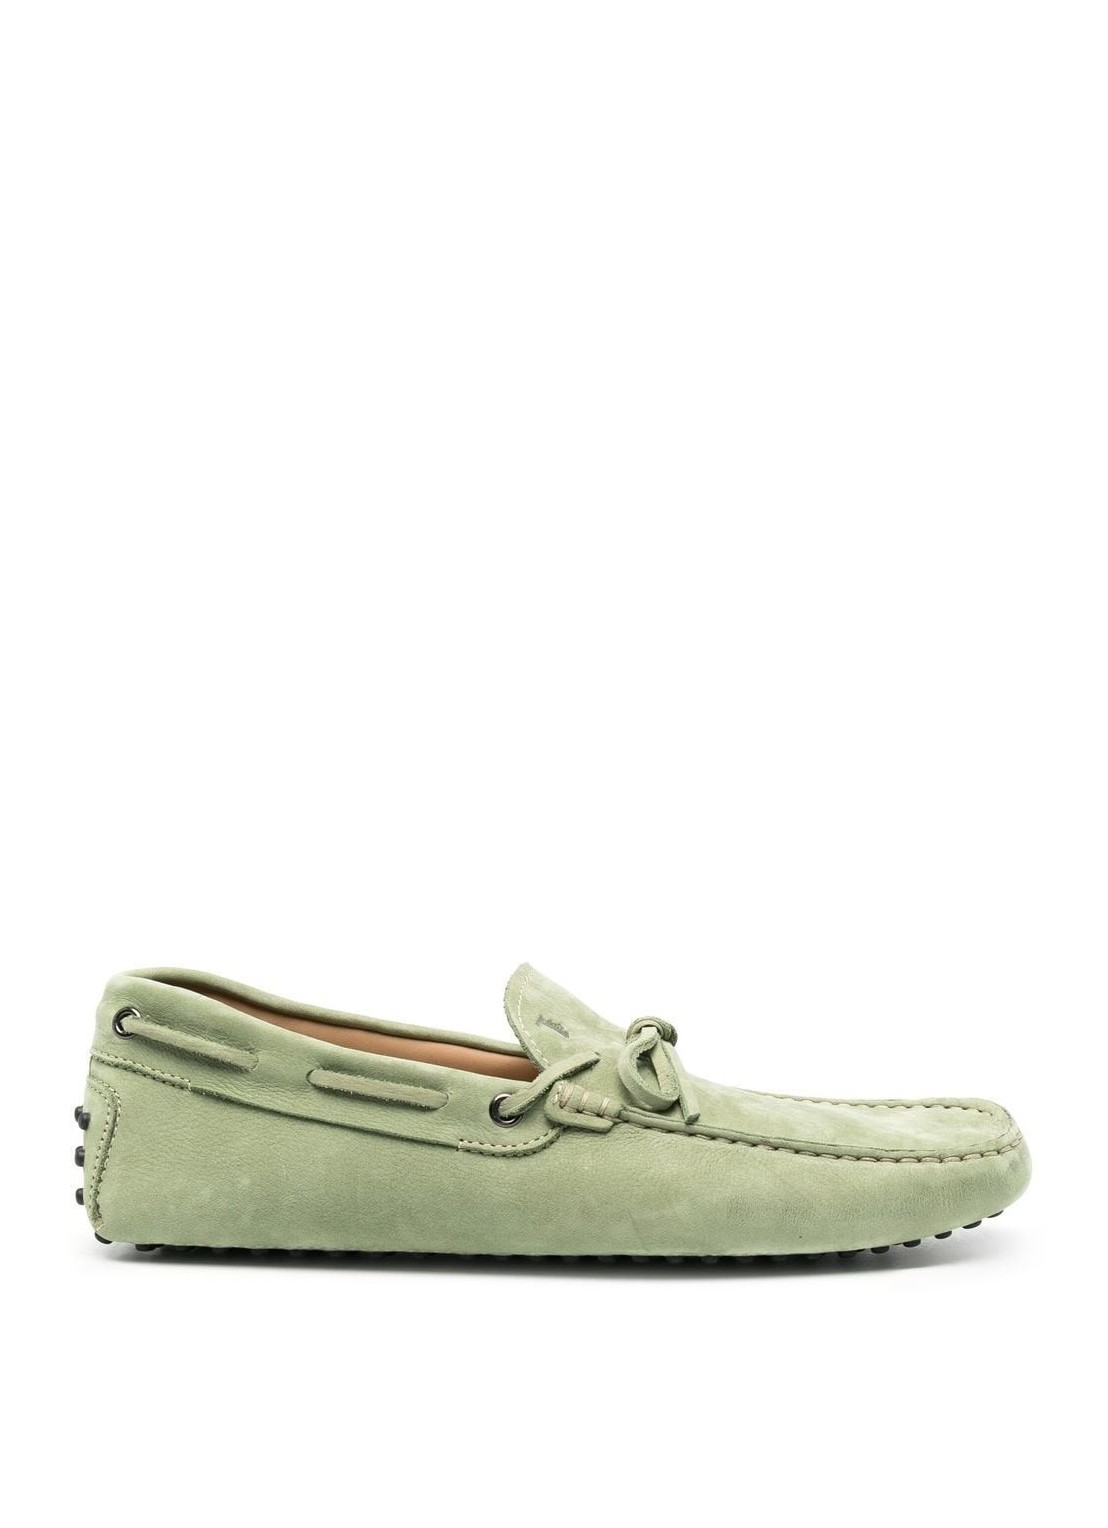 tods new laccetto occh. new gommini 122 - xxm0gw054706rnv623 oil green ...